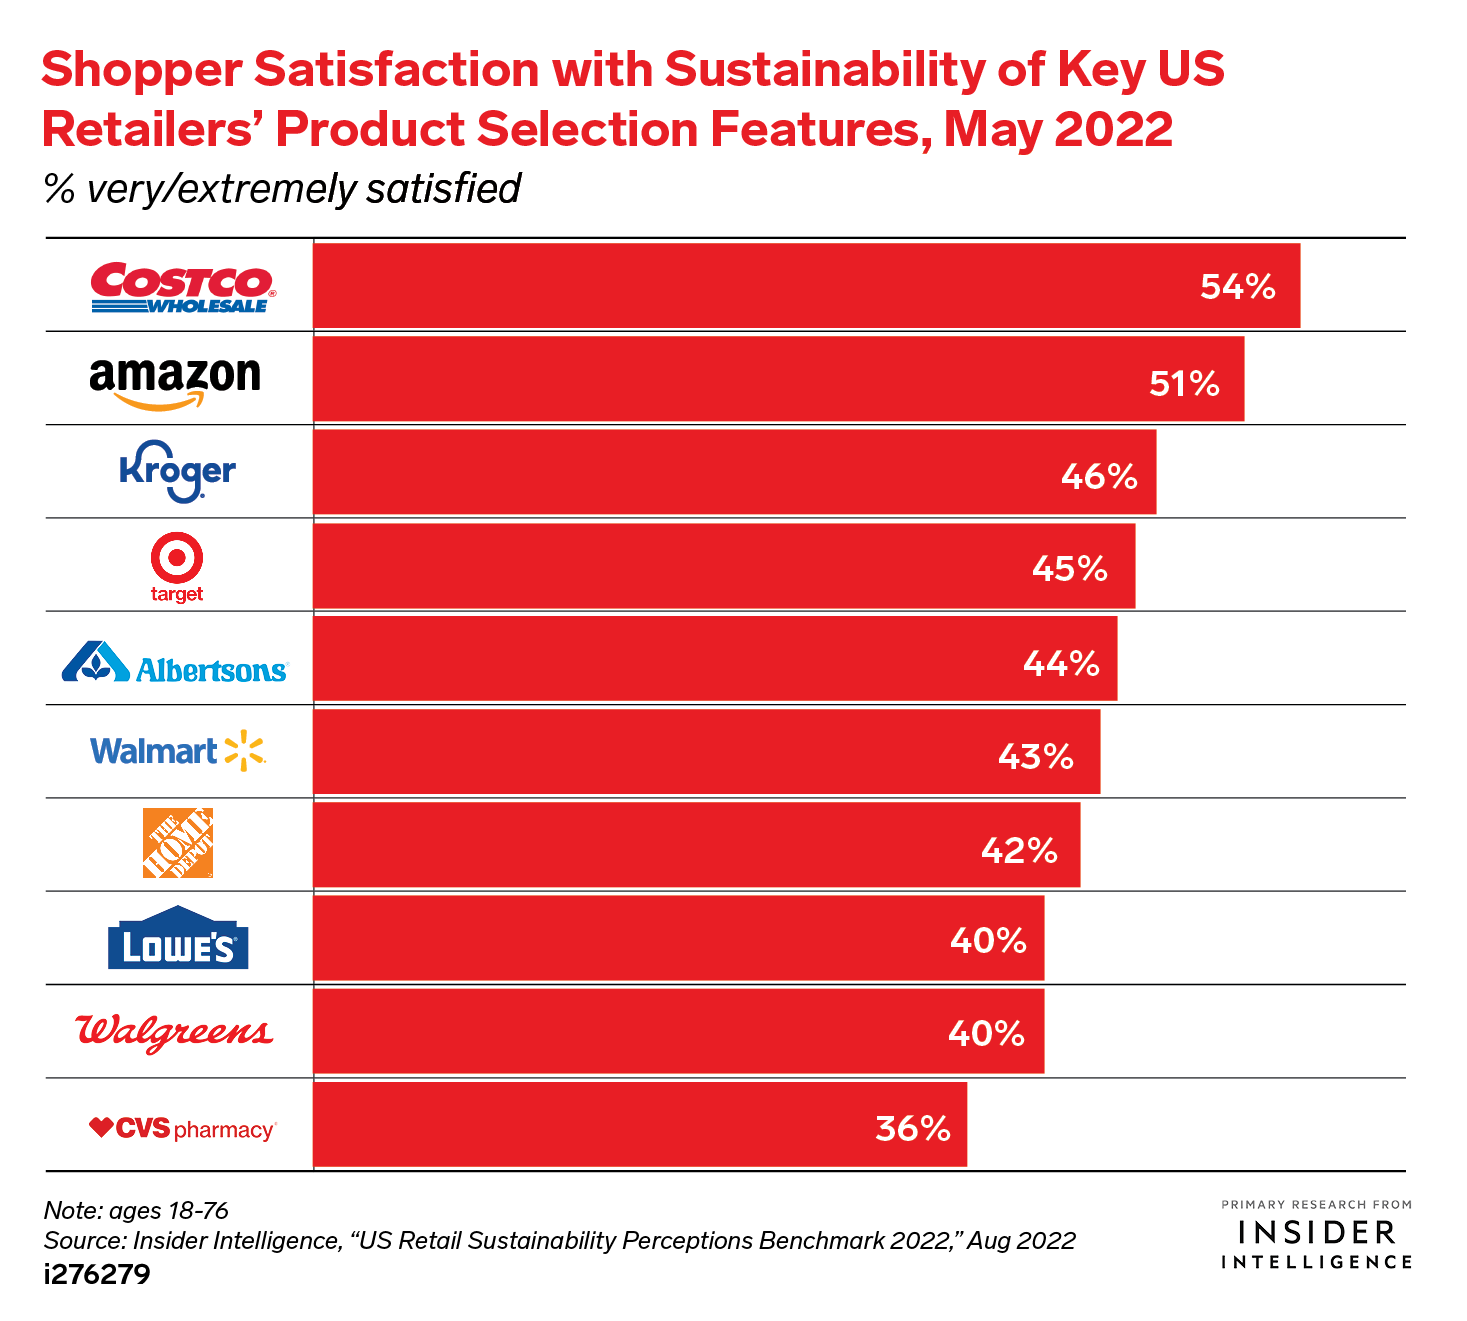 Shopper Satisfaction with the Sustainability of Product Selection Features of Key US Retailers, May 2022 (% very/extremely satisfied)